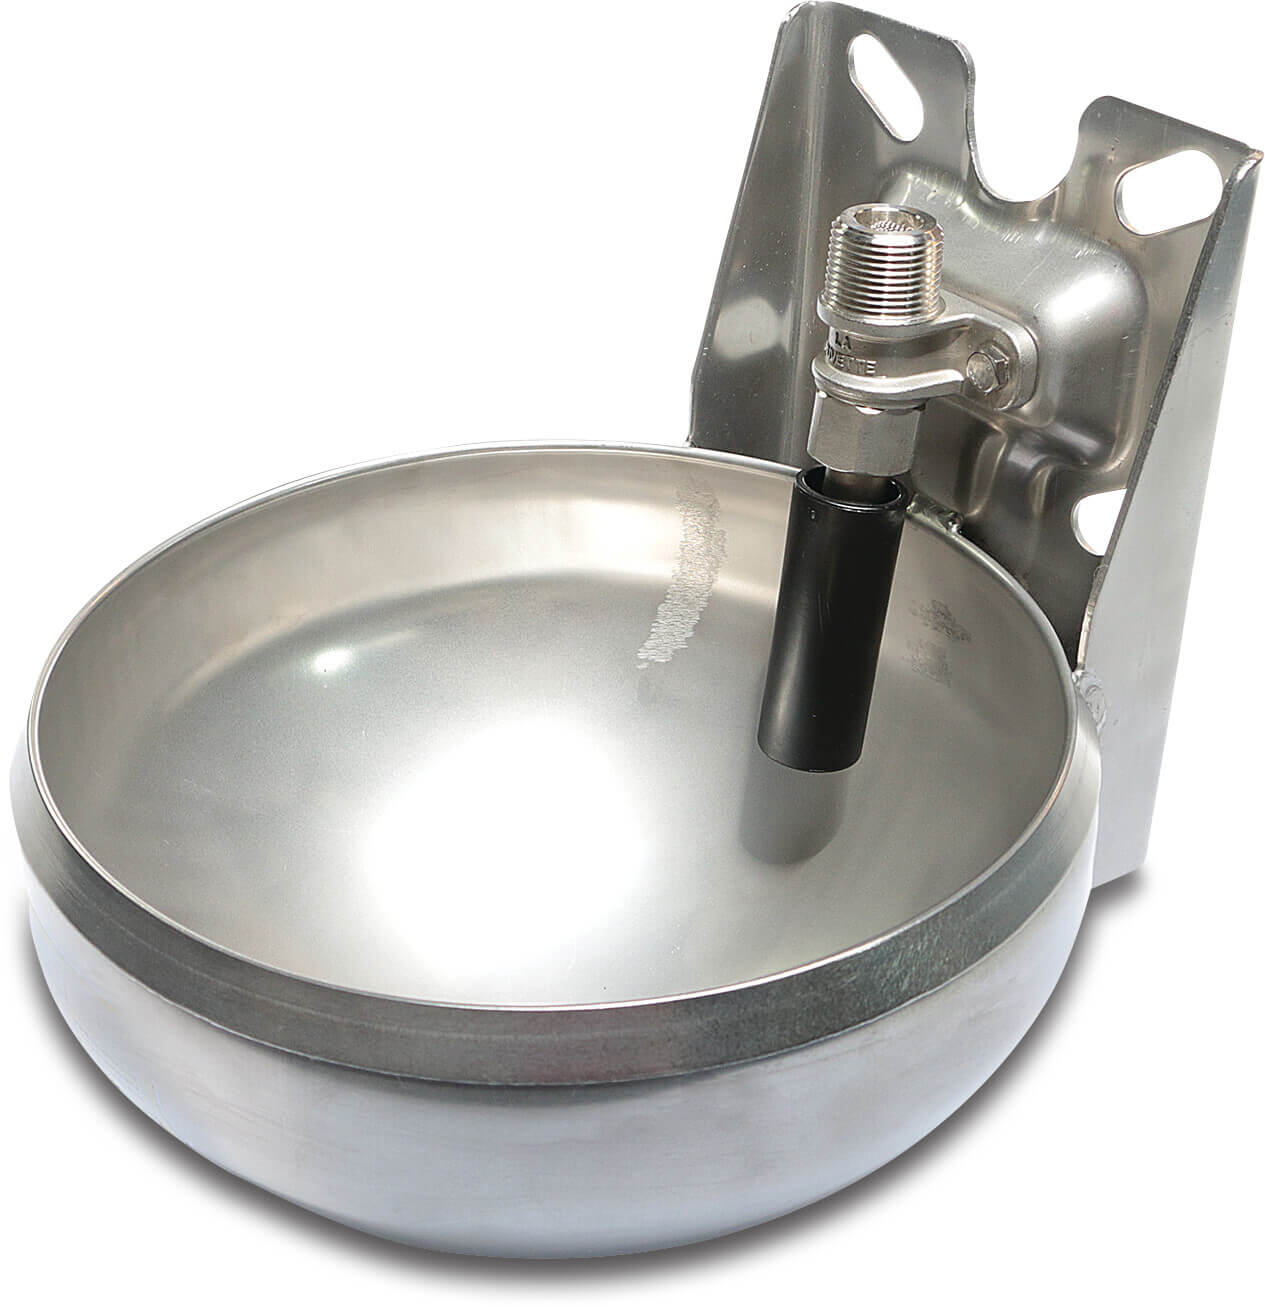 La Buvette Drinking bowl with tube stainless steel type F110 Inox